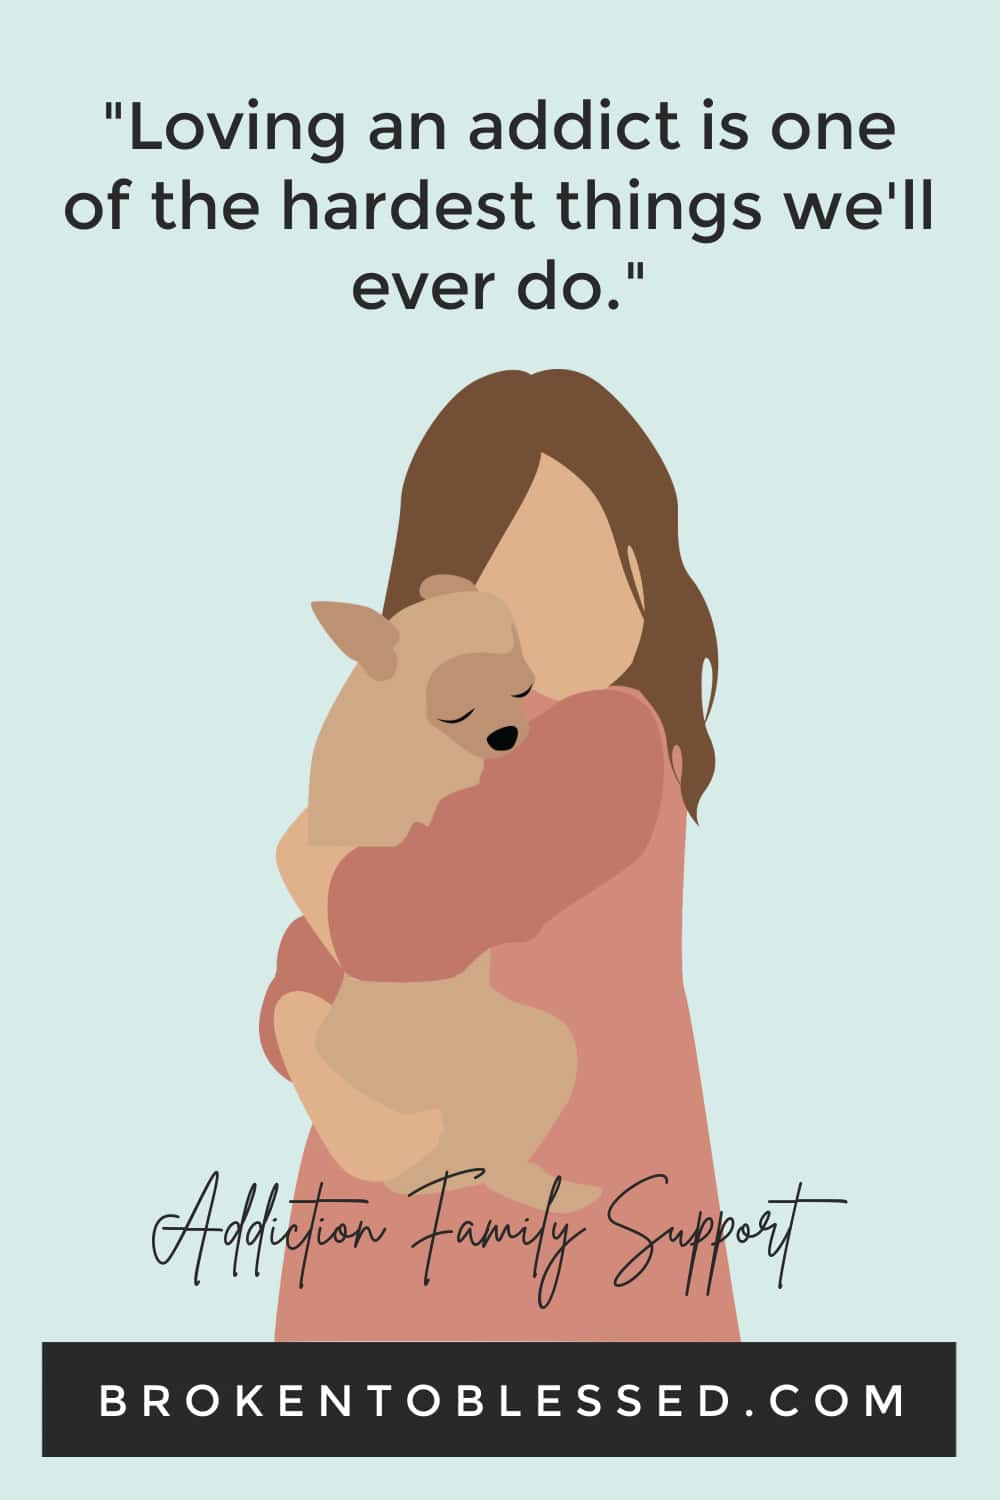 "Loving an addict is one of the hardest things we'll ever do." | how to love an addict, addiction family support 